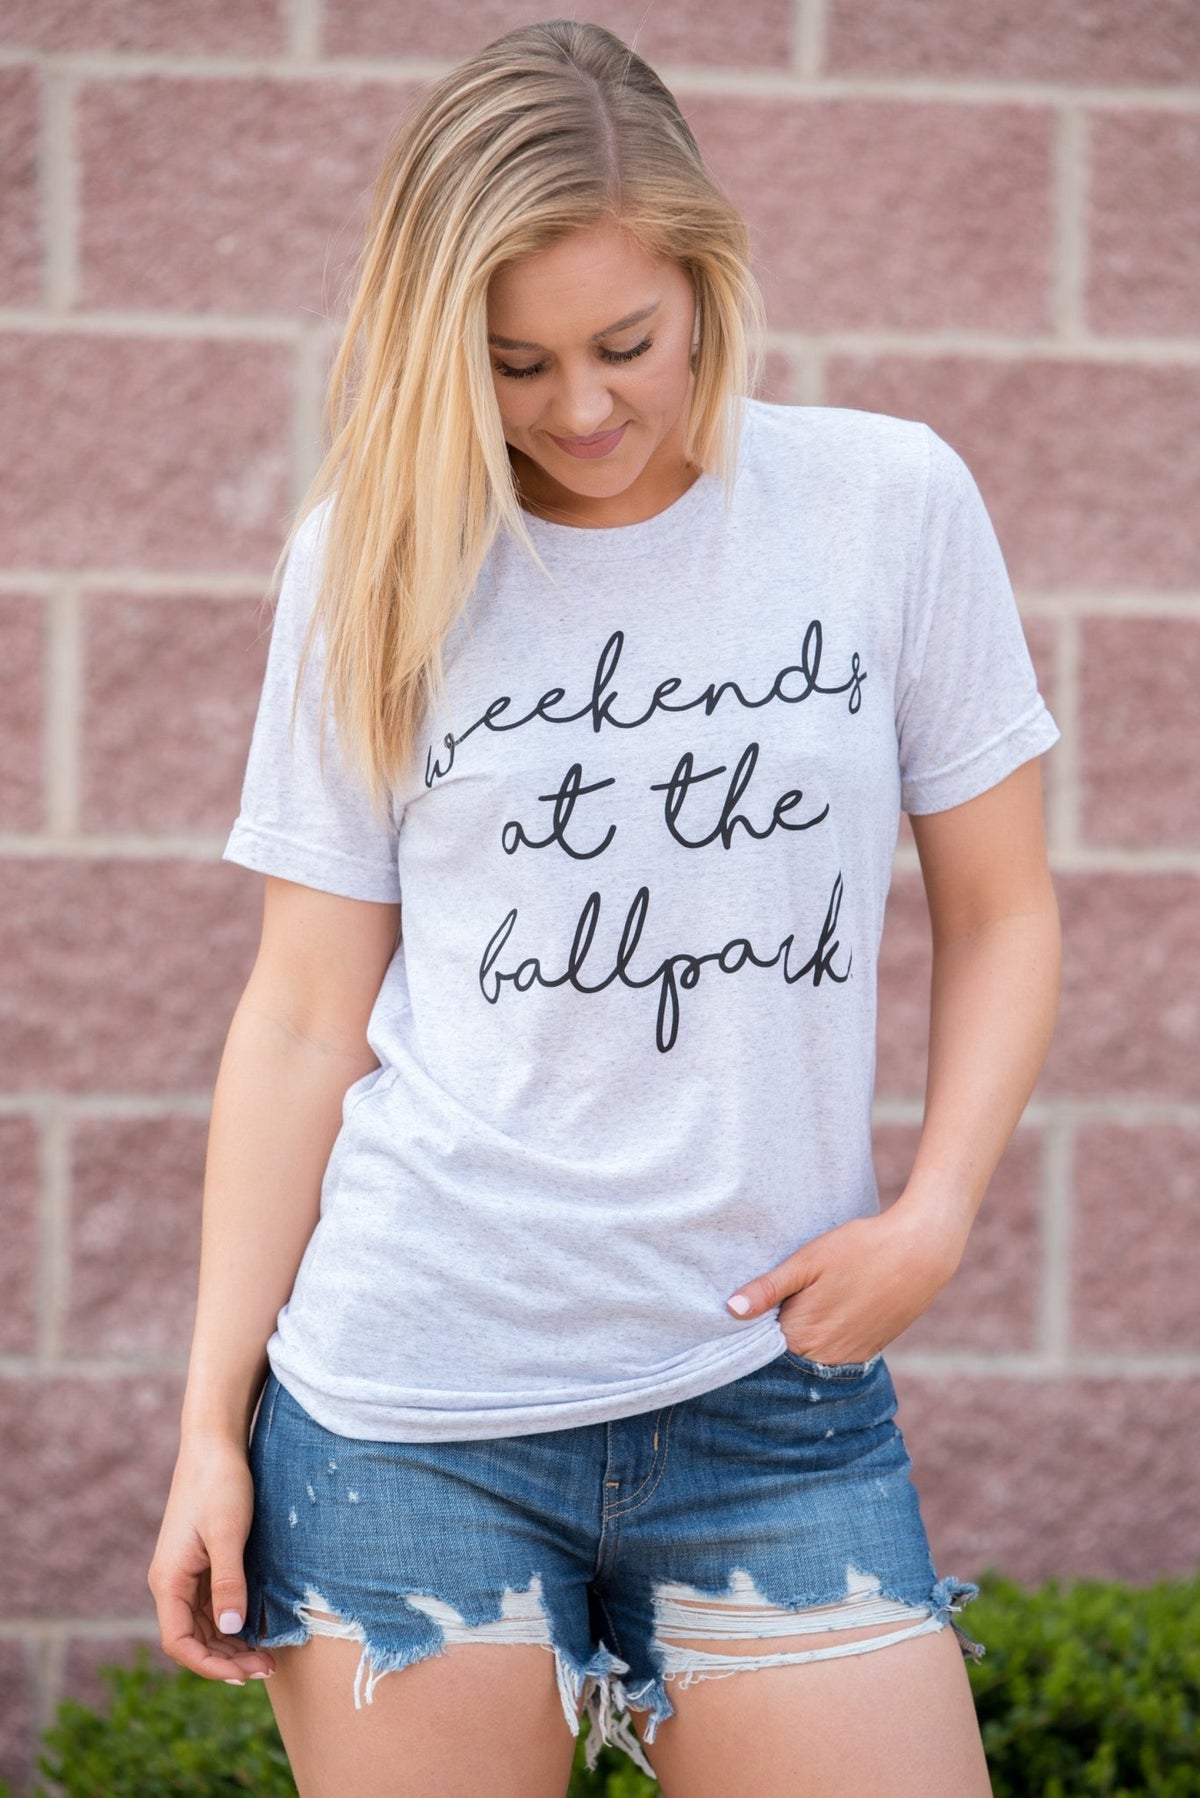 Weekends at the ball park unisex short sleeve t-shirt white fleck - Stylish T-shirts - Trendy Graphic T-Shirts and Tank Tops at Lush Fashion Lounge Boutique in Oklahoma City